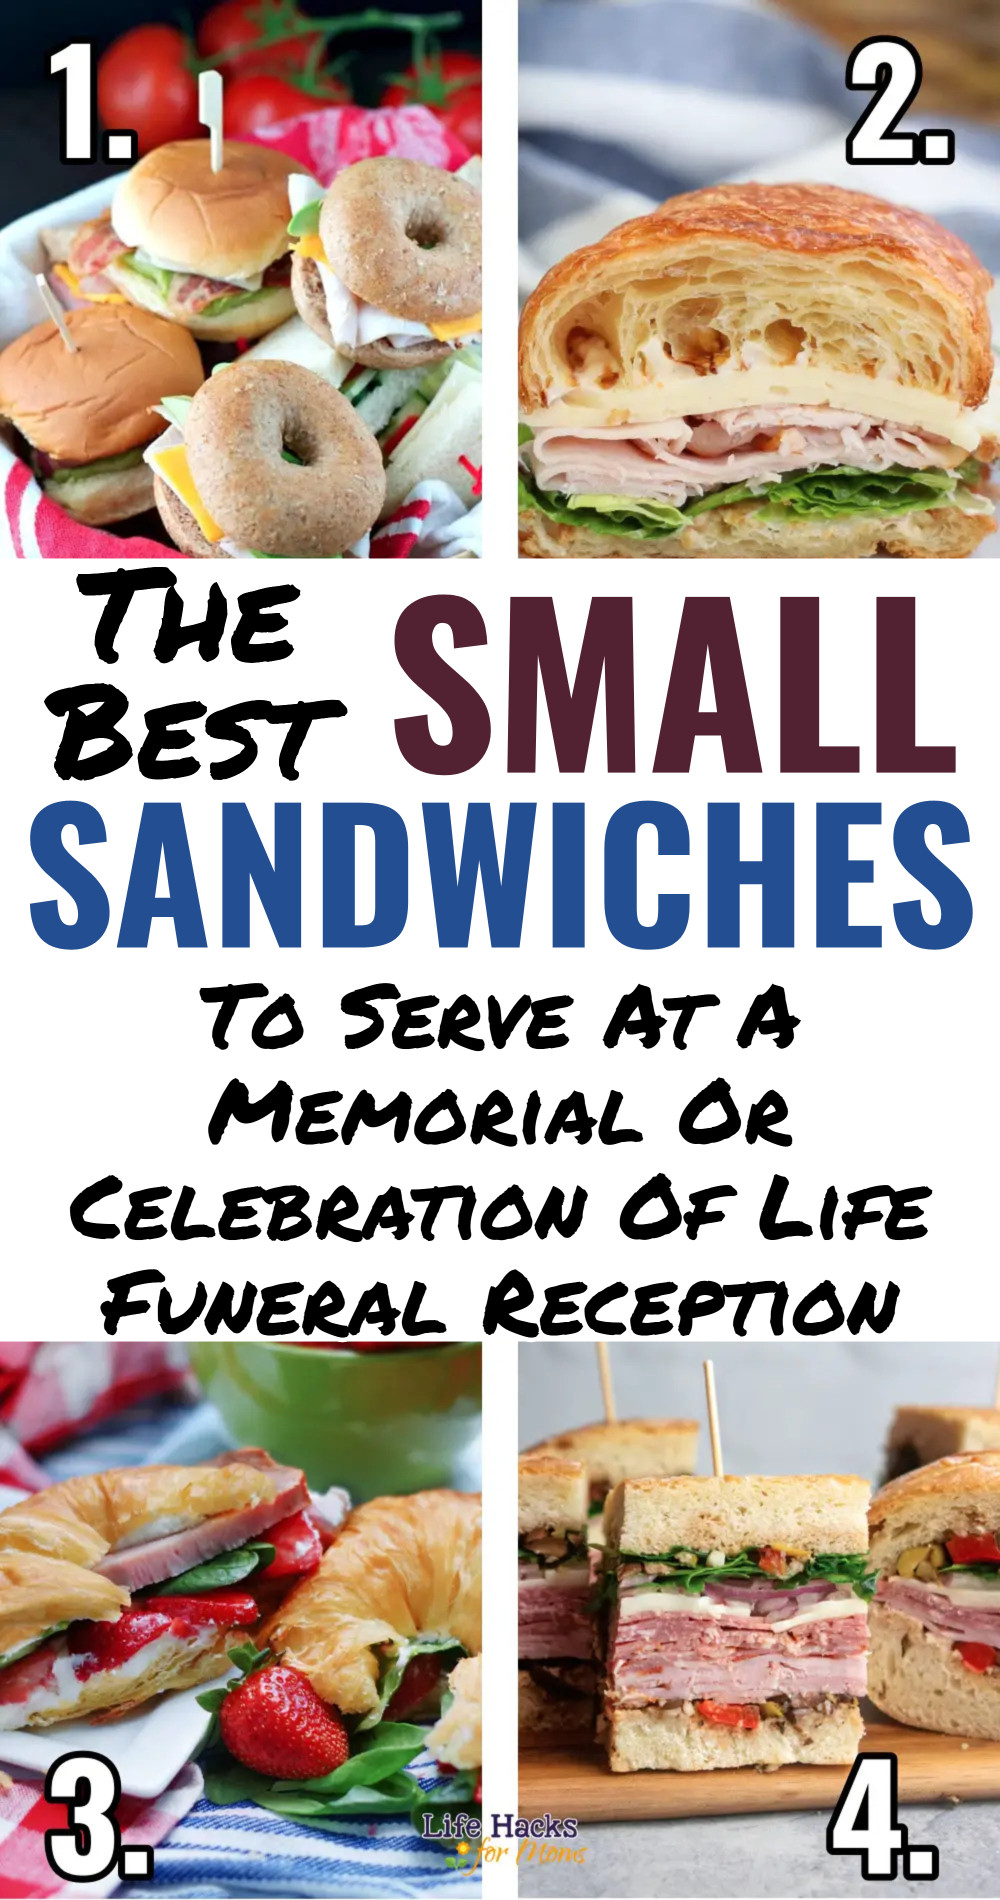 The best small sandwiches to serve at a memorial or celebration of life funeral reception